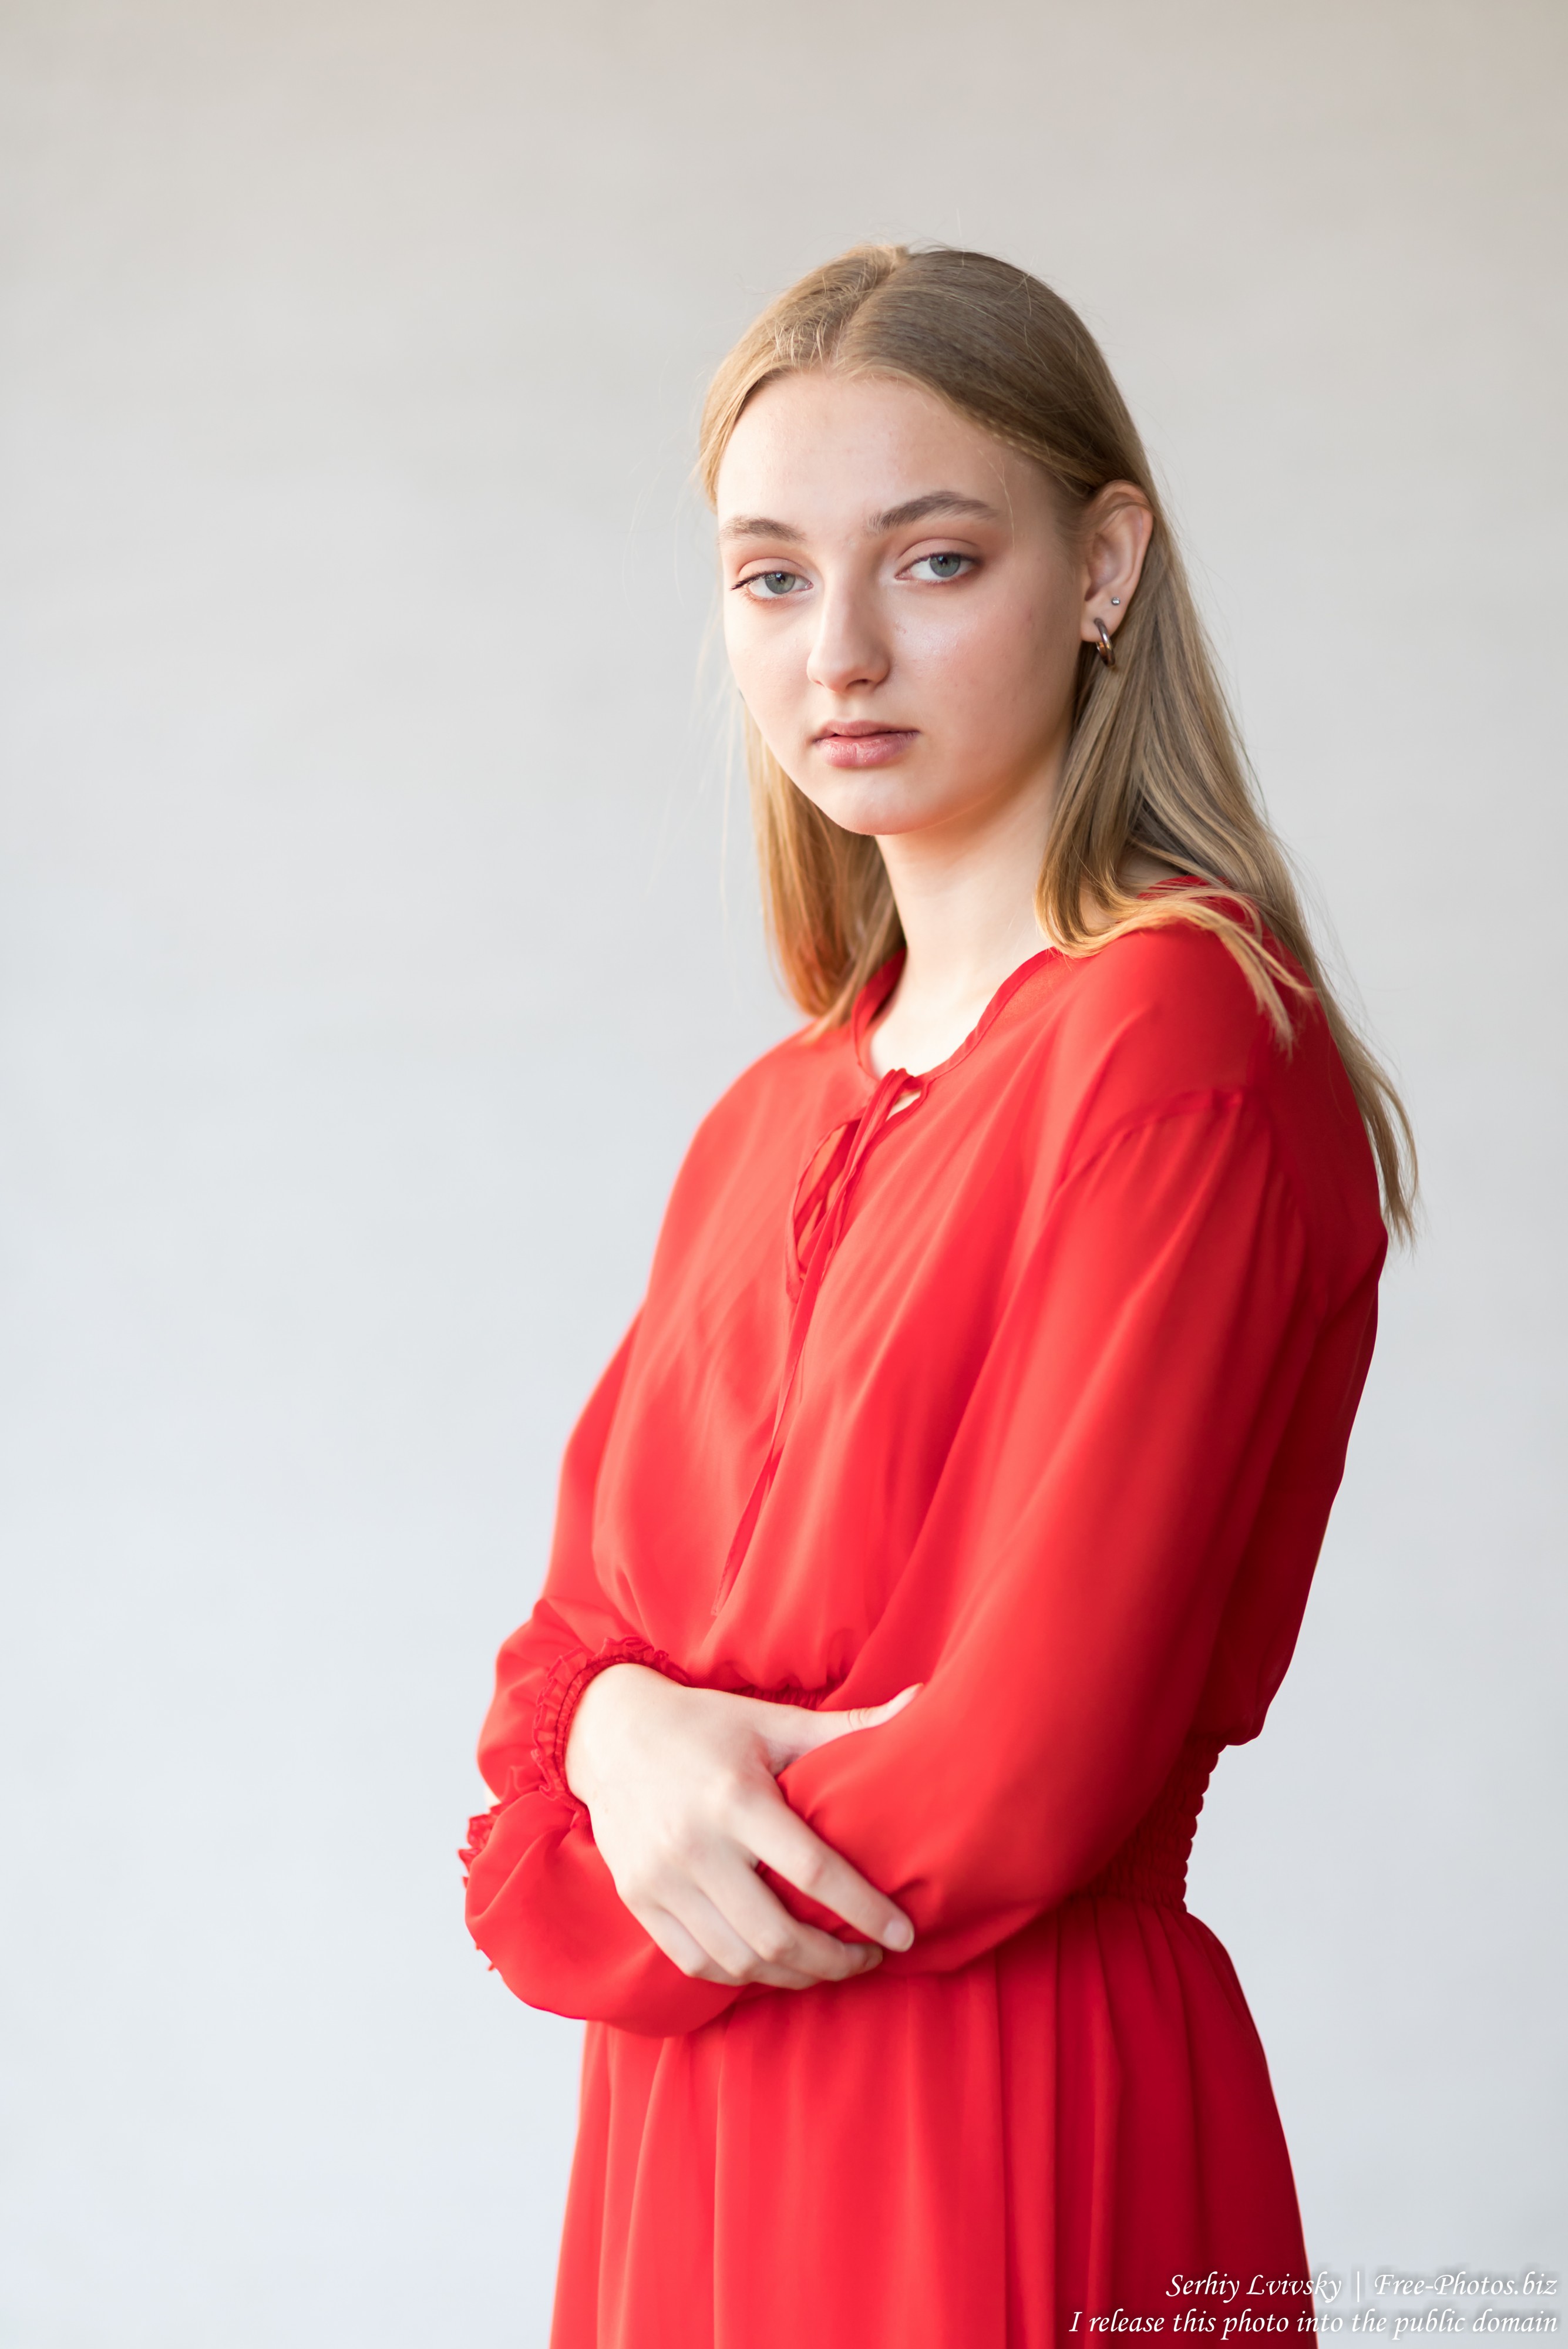 Nastia - a 16-year-old natural blonde girl photographed in September 2019 by Serhiy Lvivsky, picture 7